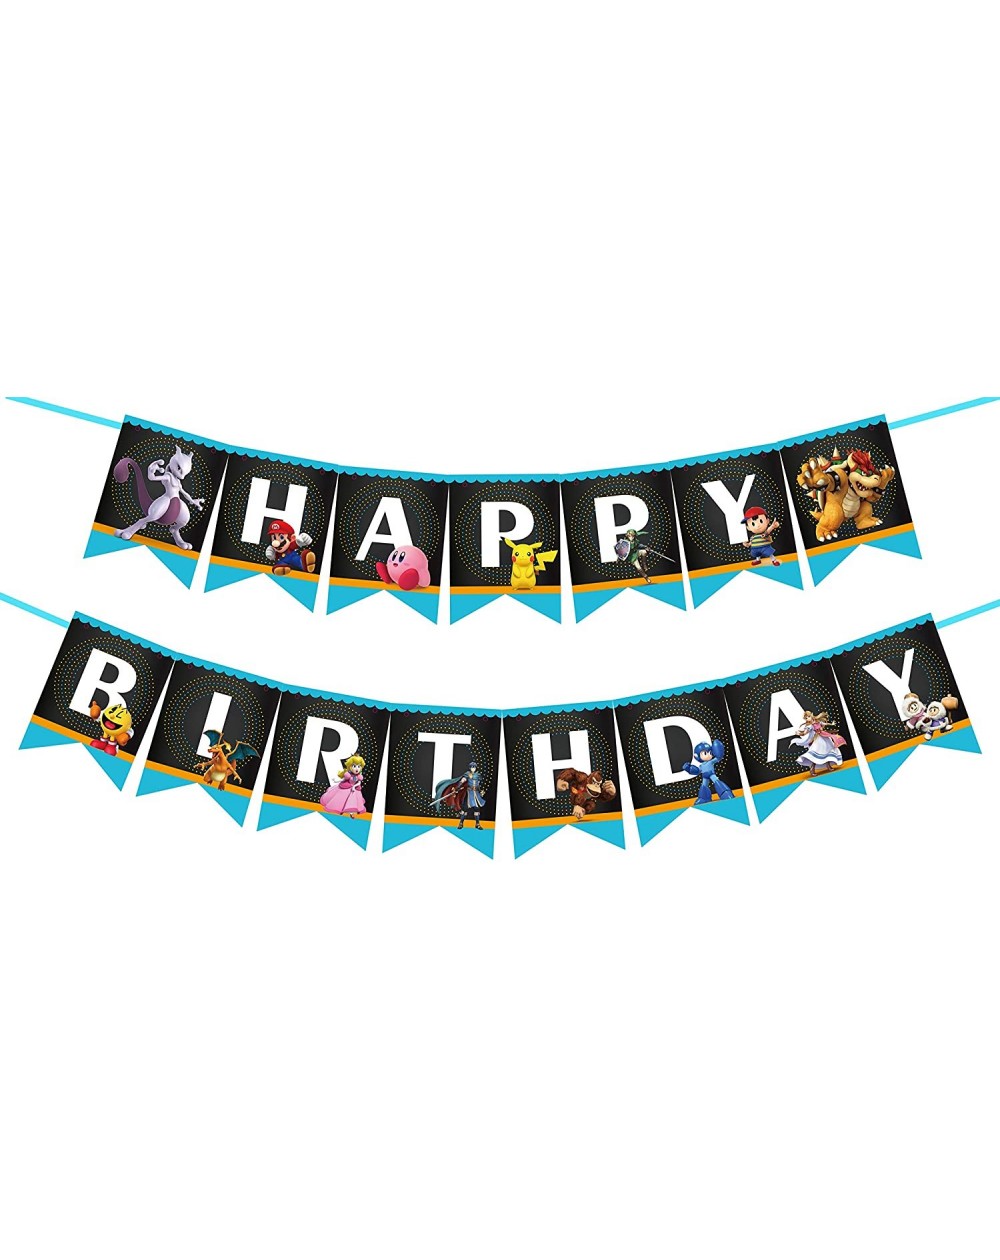 Banners Super Smash Brothers Happy Birthday Banner- Game Birthday Banner for Gamer's Super Mario Theme Party Supplies. - CZ18...